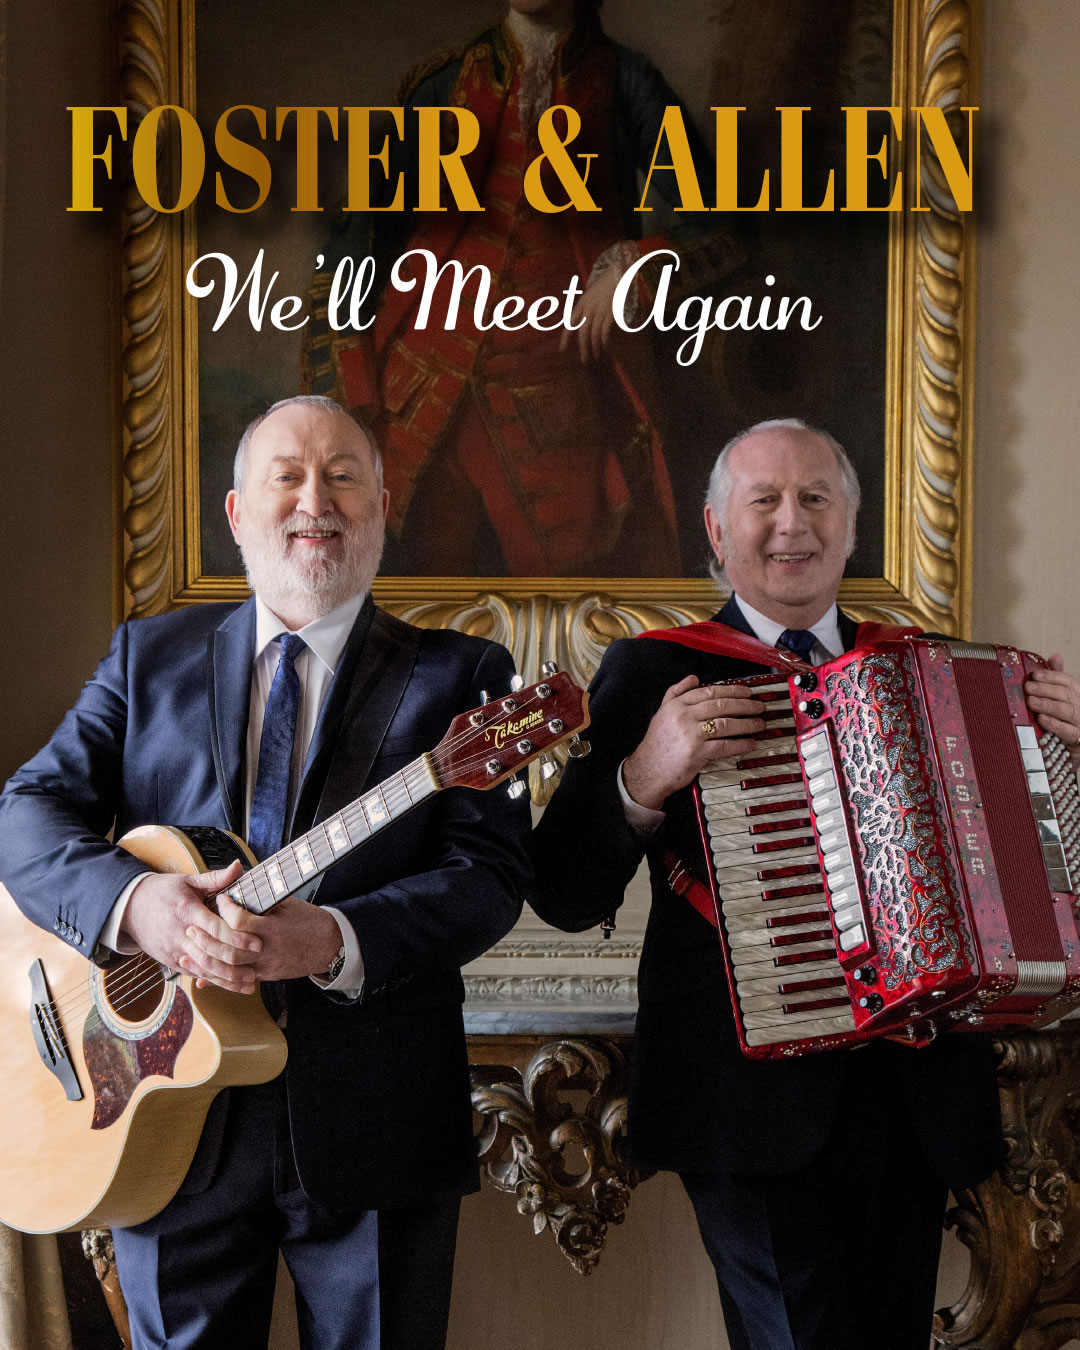 Book Foster & Allen for your next event with David Hull Promotions Limited